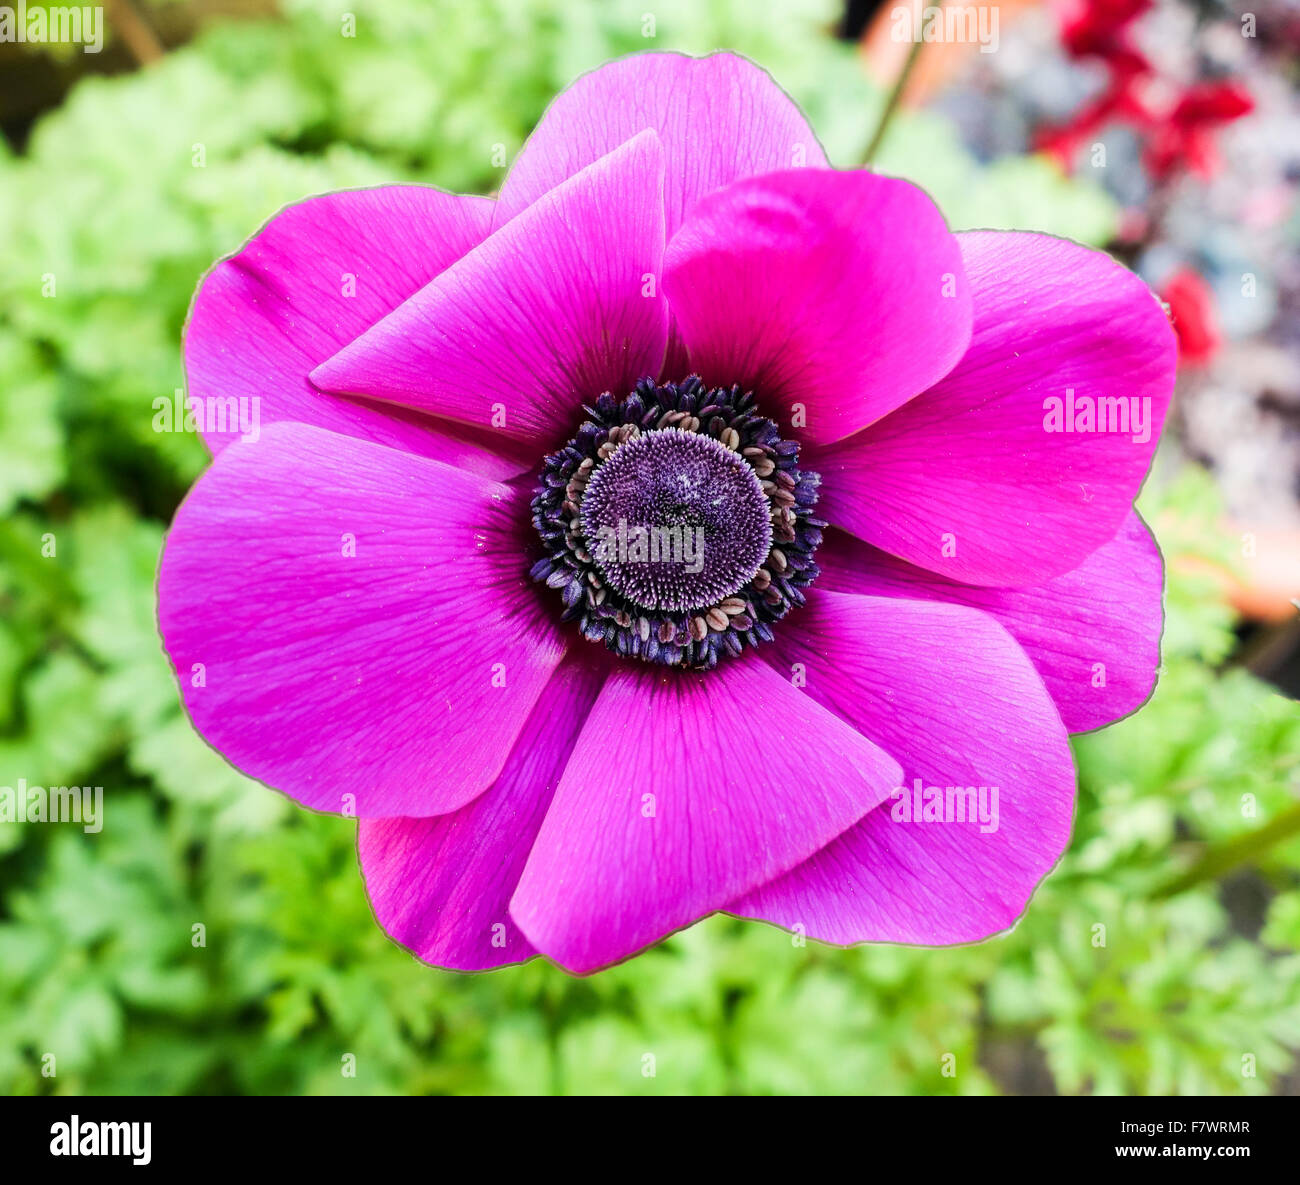 The pink purple petals of an Anemone 'Sylphide' flower Stock Photo